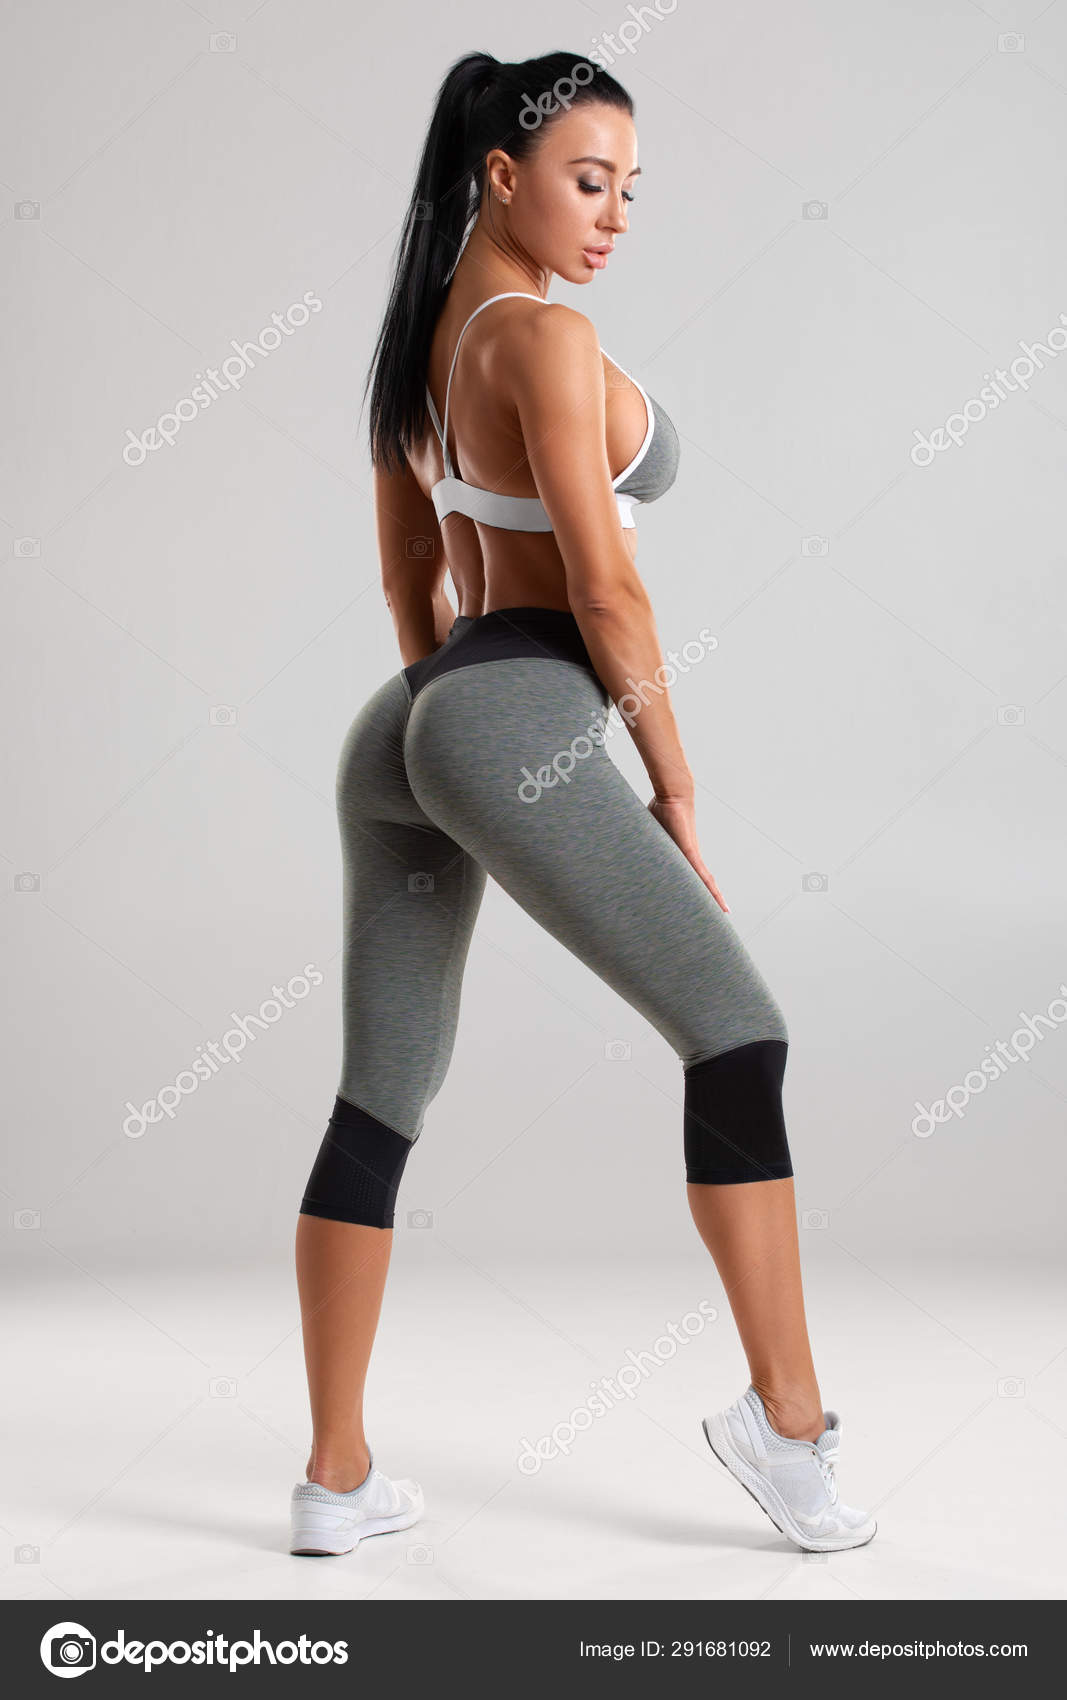 234 Beautiful Sexy Woman Wearing Leggings Stock Photos - Free &  Royalty-Free Stock Photos from Dreamstime